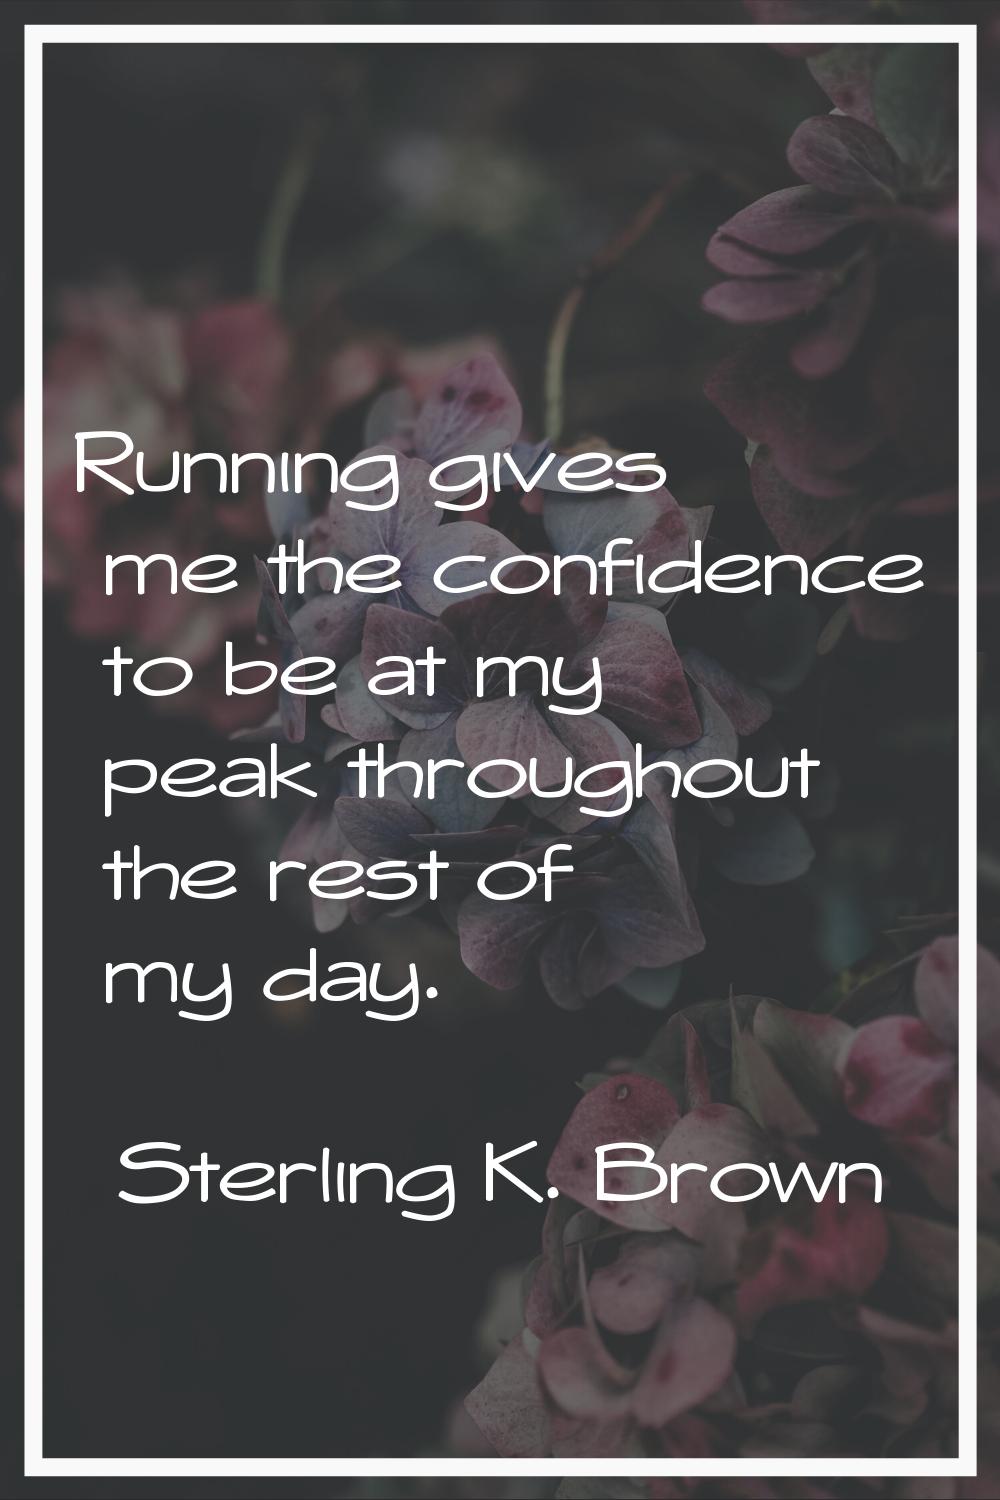 Running gives me the confidence to be at my peak throughout the rest of my day.